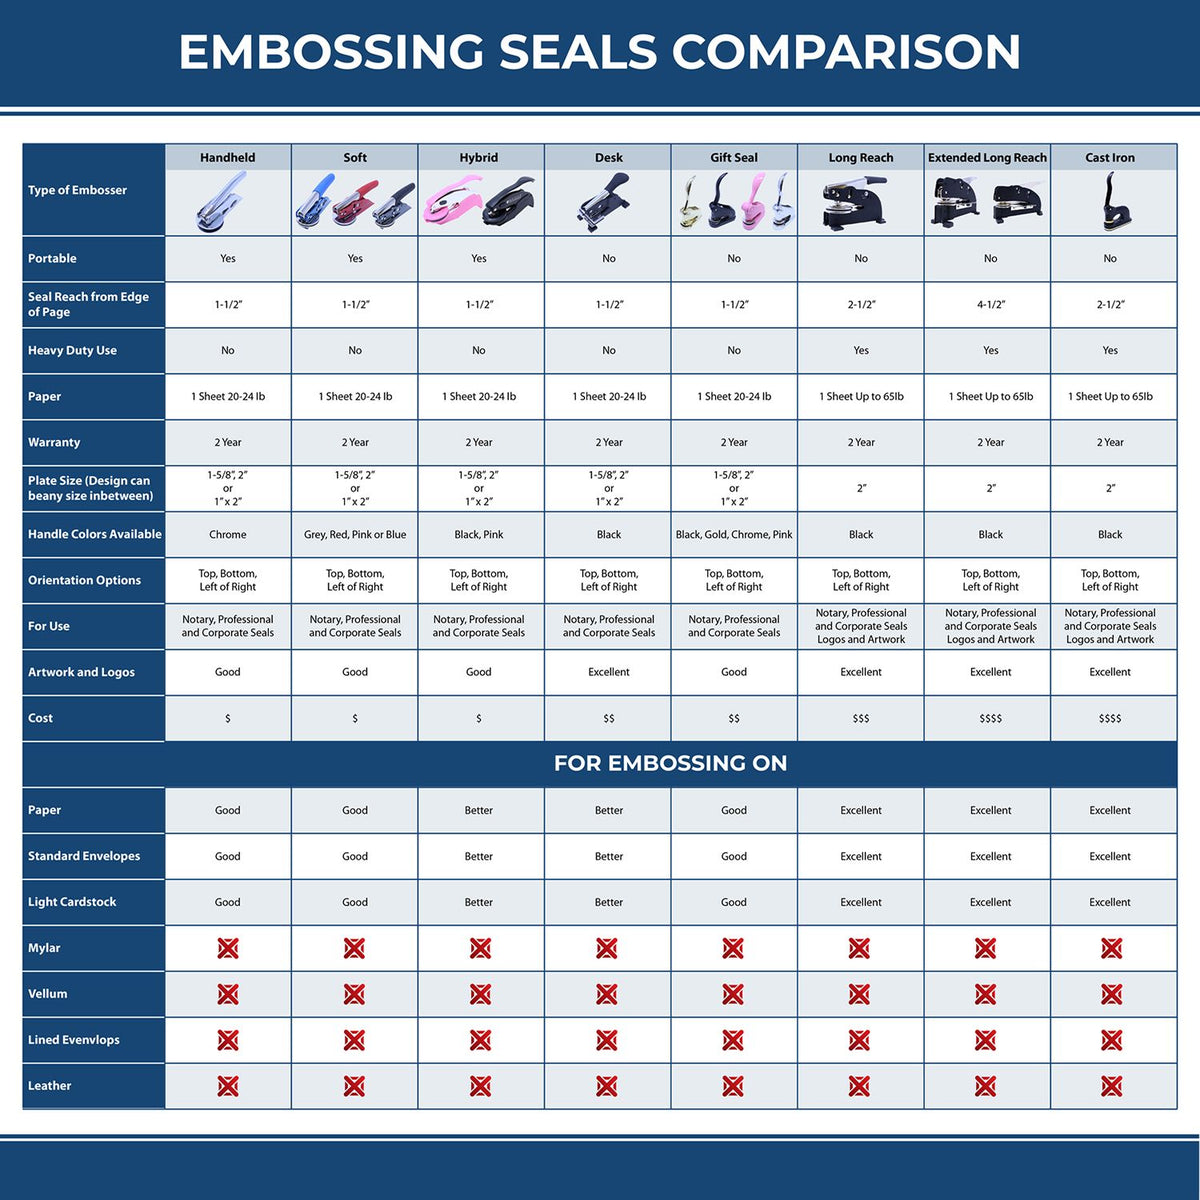 A comparison chart for the different types of mount models available for the Hybrid Washington Land Surveyor Seal